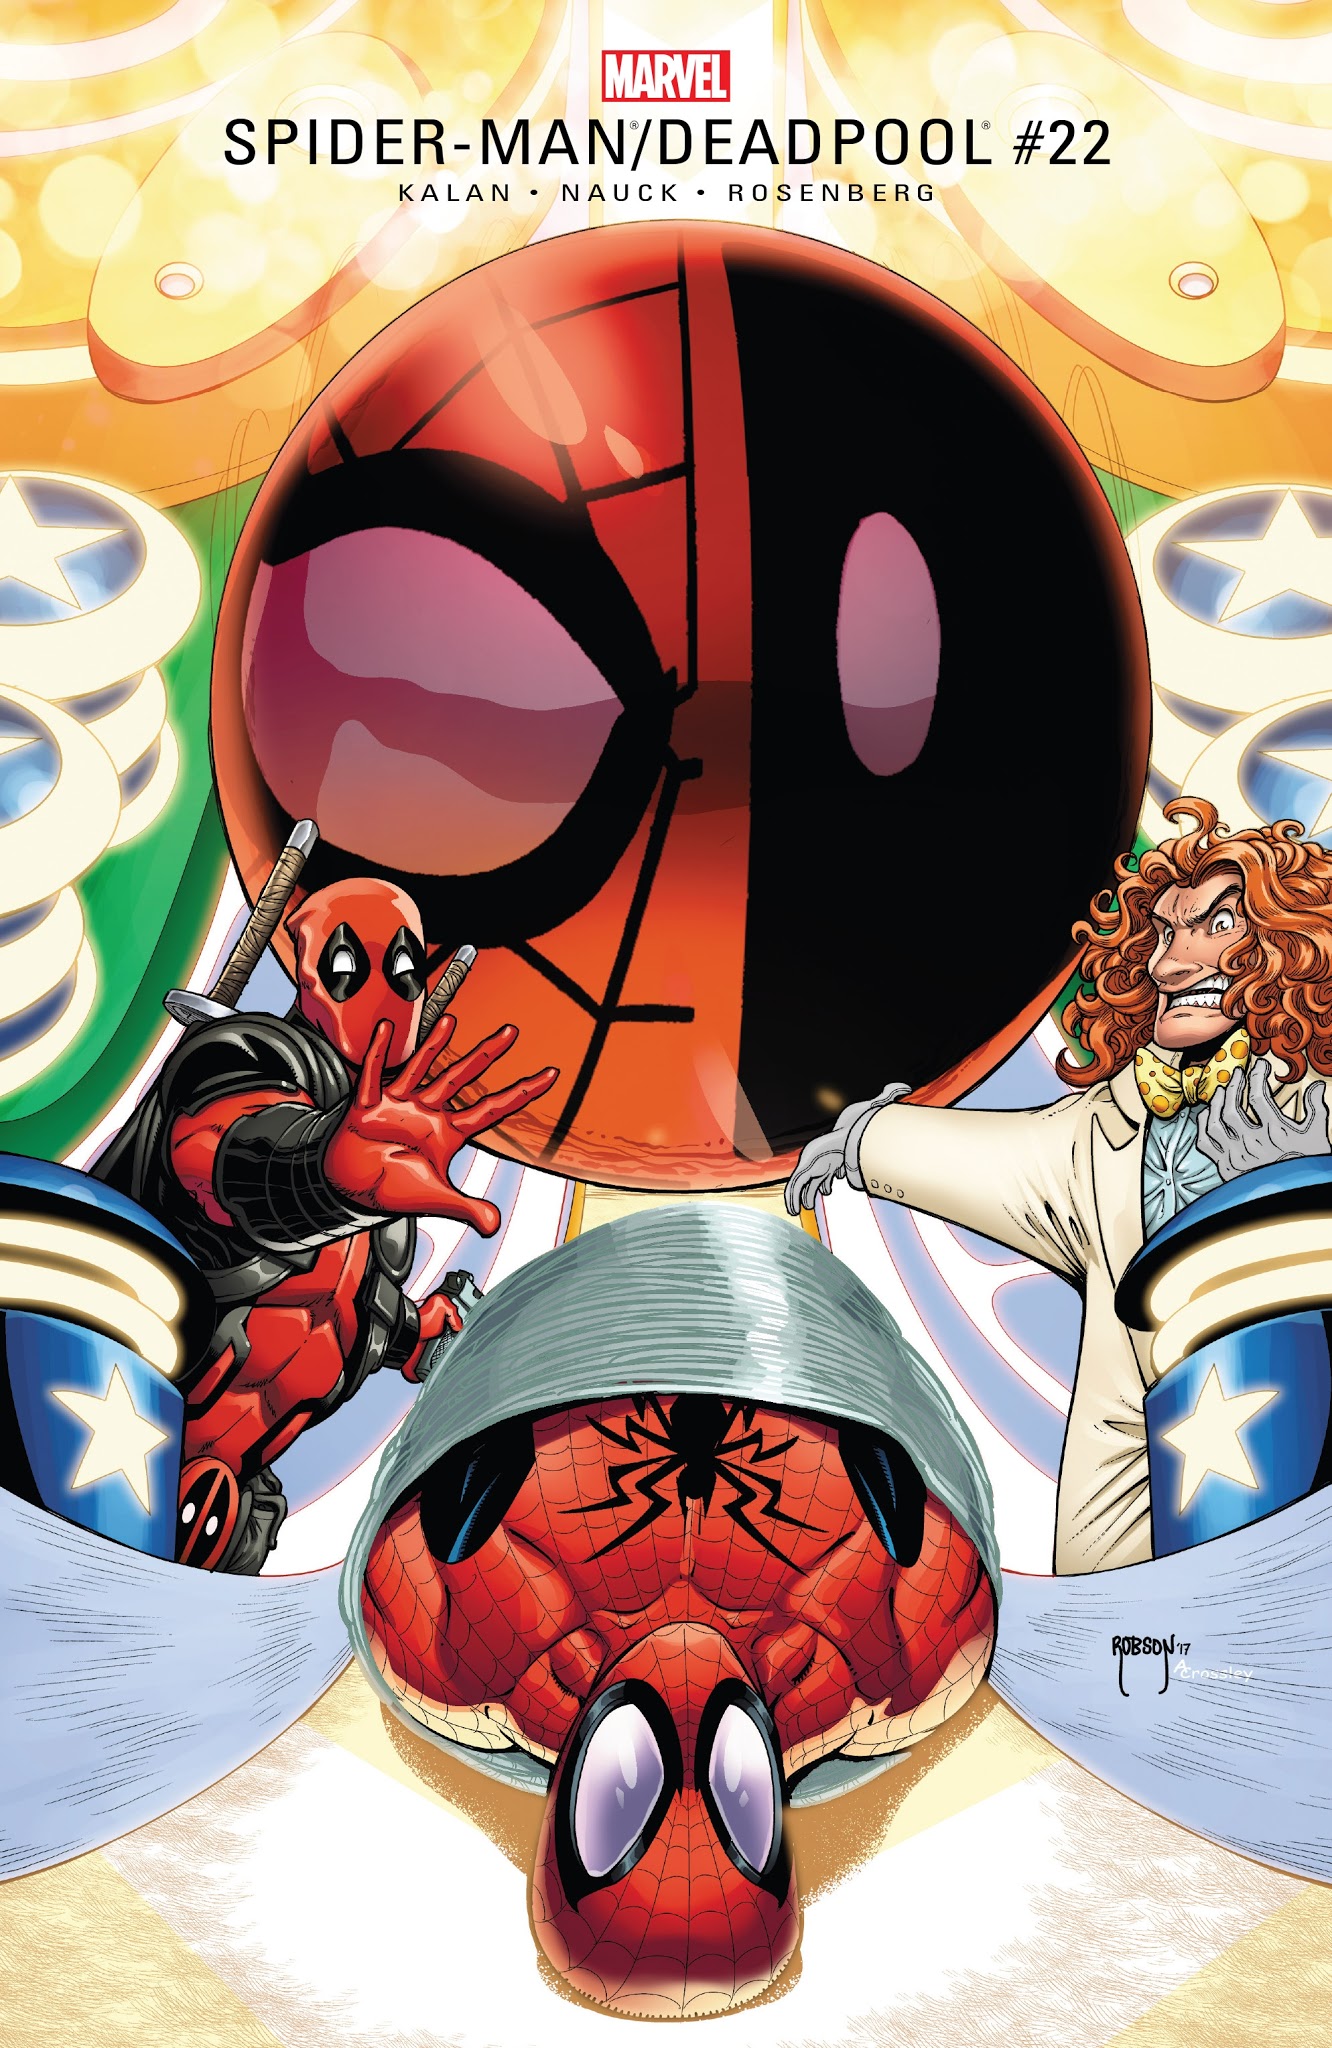 Spider Man Deadpool Issue 22 | Read Spider Man Deadpool Issue 22 comic  online in high quality. Read Full Comic online for free - Read comics online  in high quality .| READ COMIC ONLINE